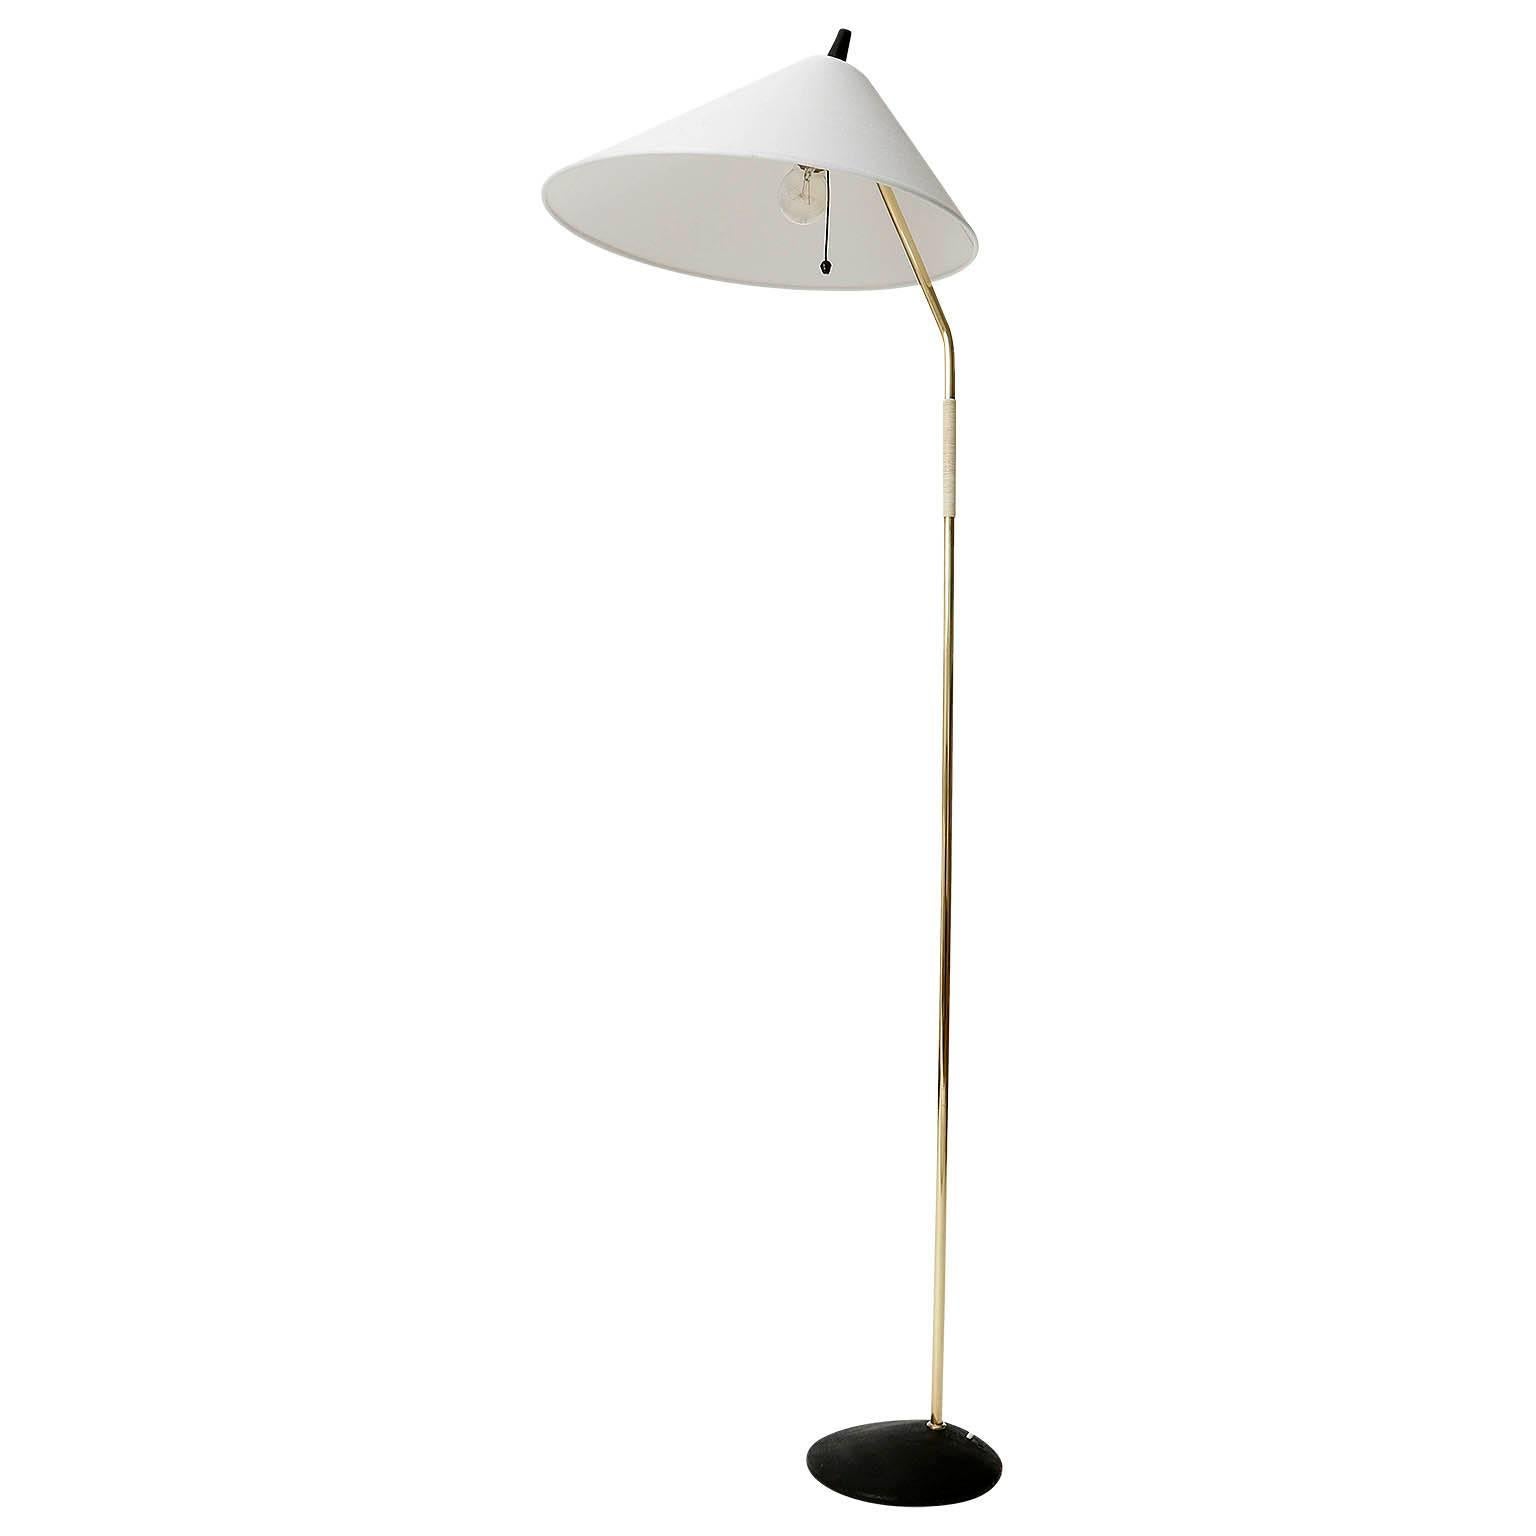 An Austrian brass floor lamp manufactured in Mid-Century, circa 1960 (end of 1950s or early 1960s).
Attributed to Rupert Nikoll or J.T. Kalmar.
The light is in excellent condition. It has been rewired, repolished and the lamp shade has been renewed